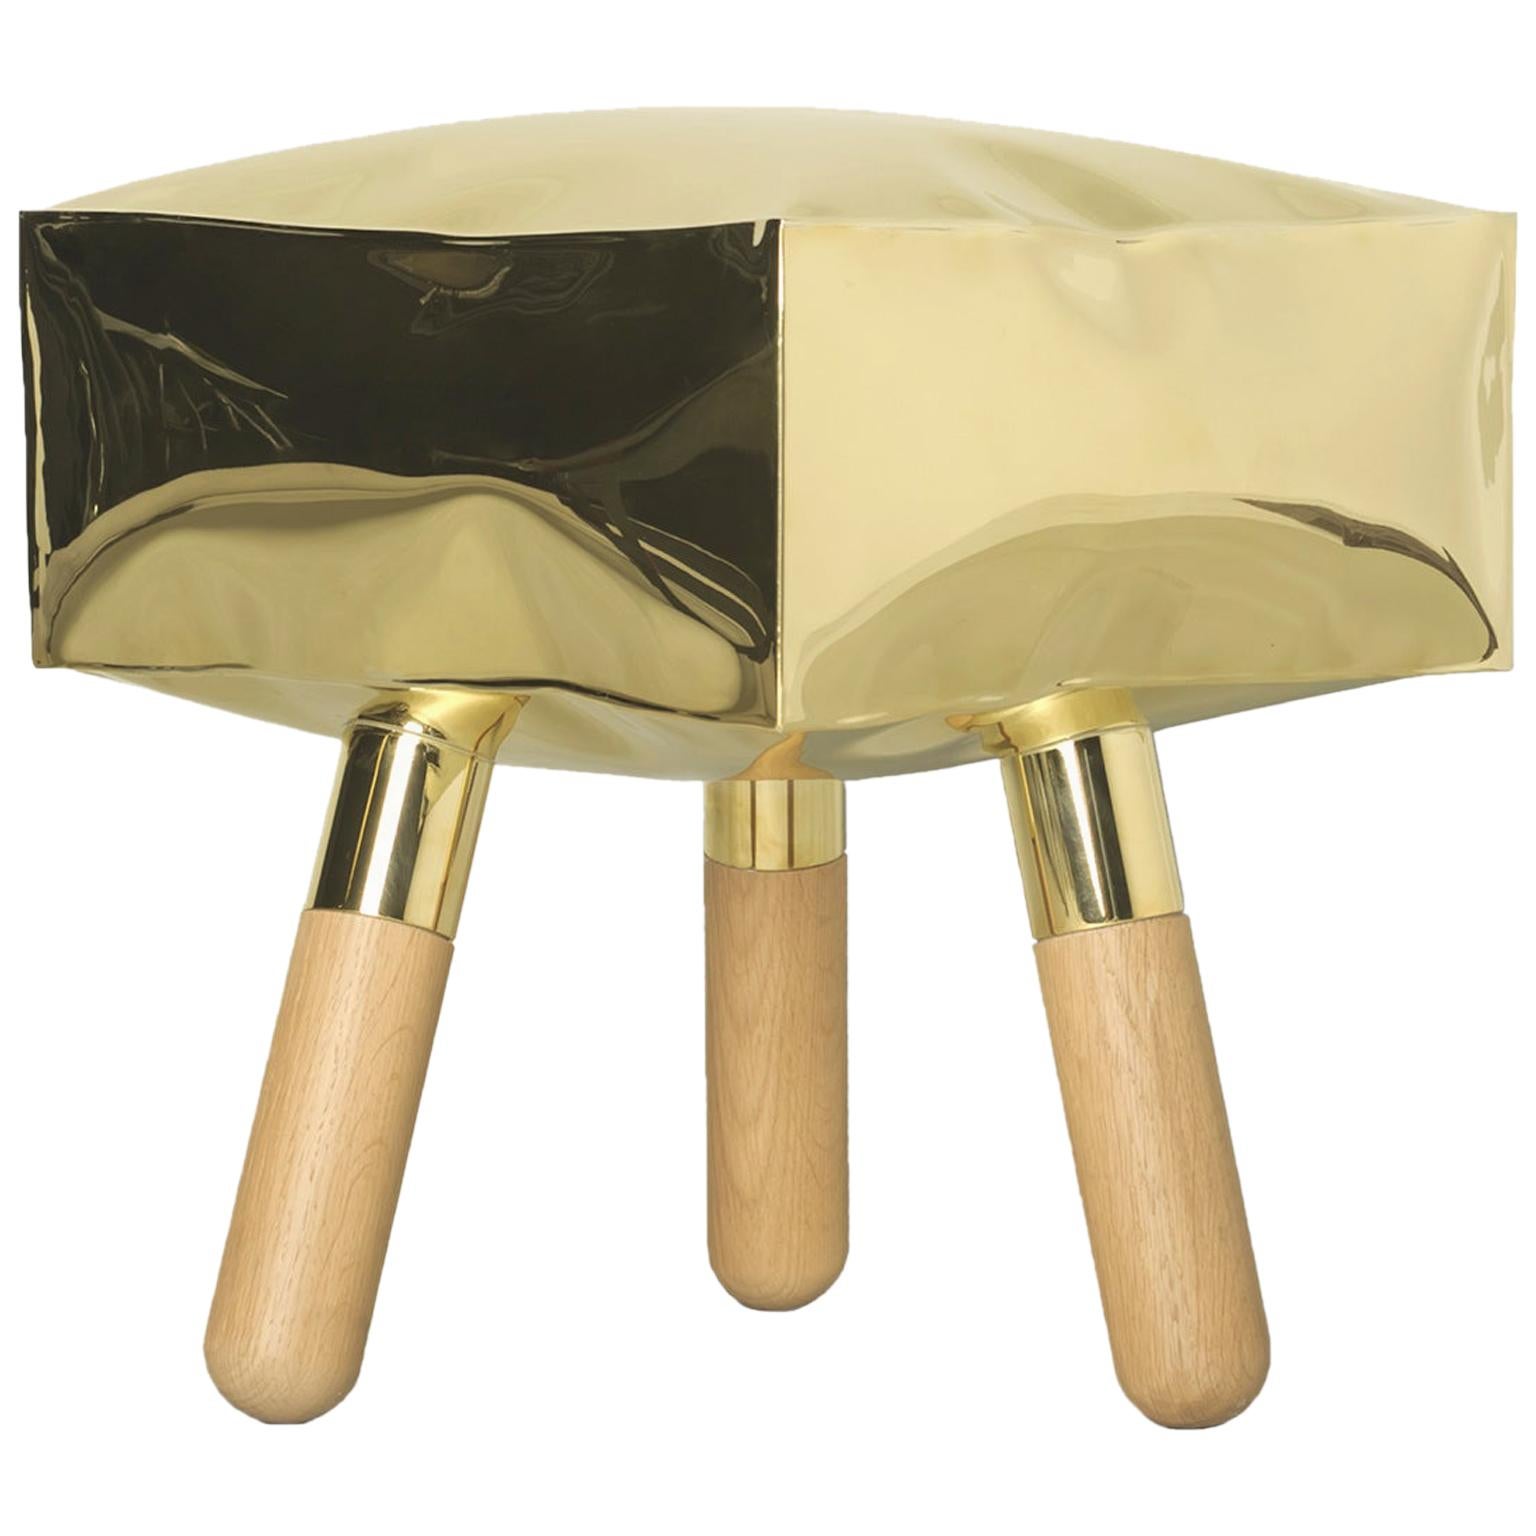 Contemporary Limited Edition Wood Brass Stool, Icenine V1 by Edizione Limitata